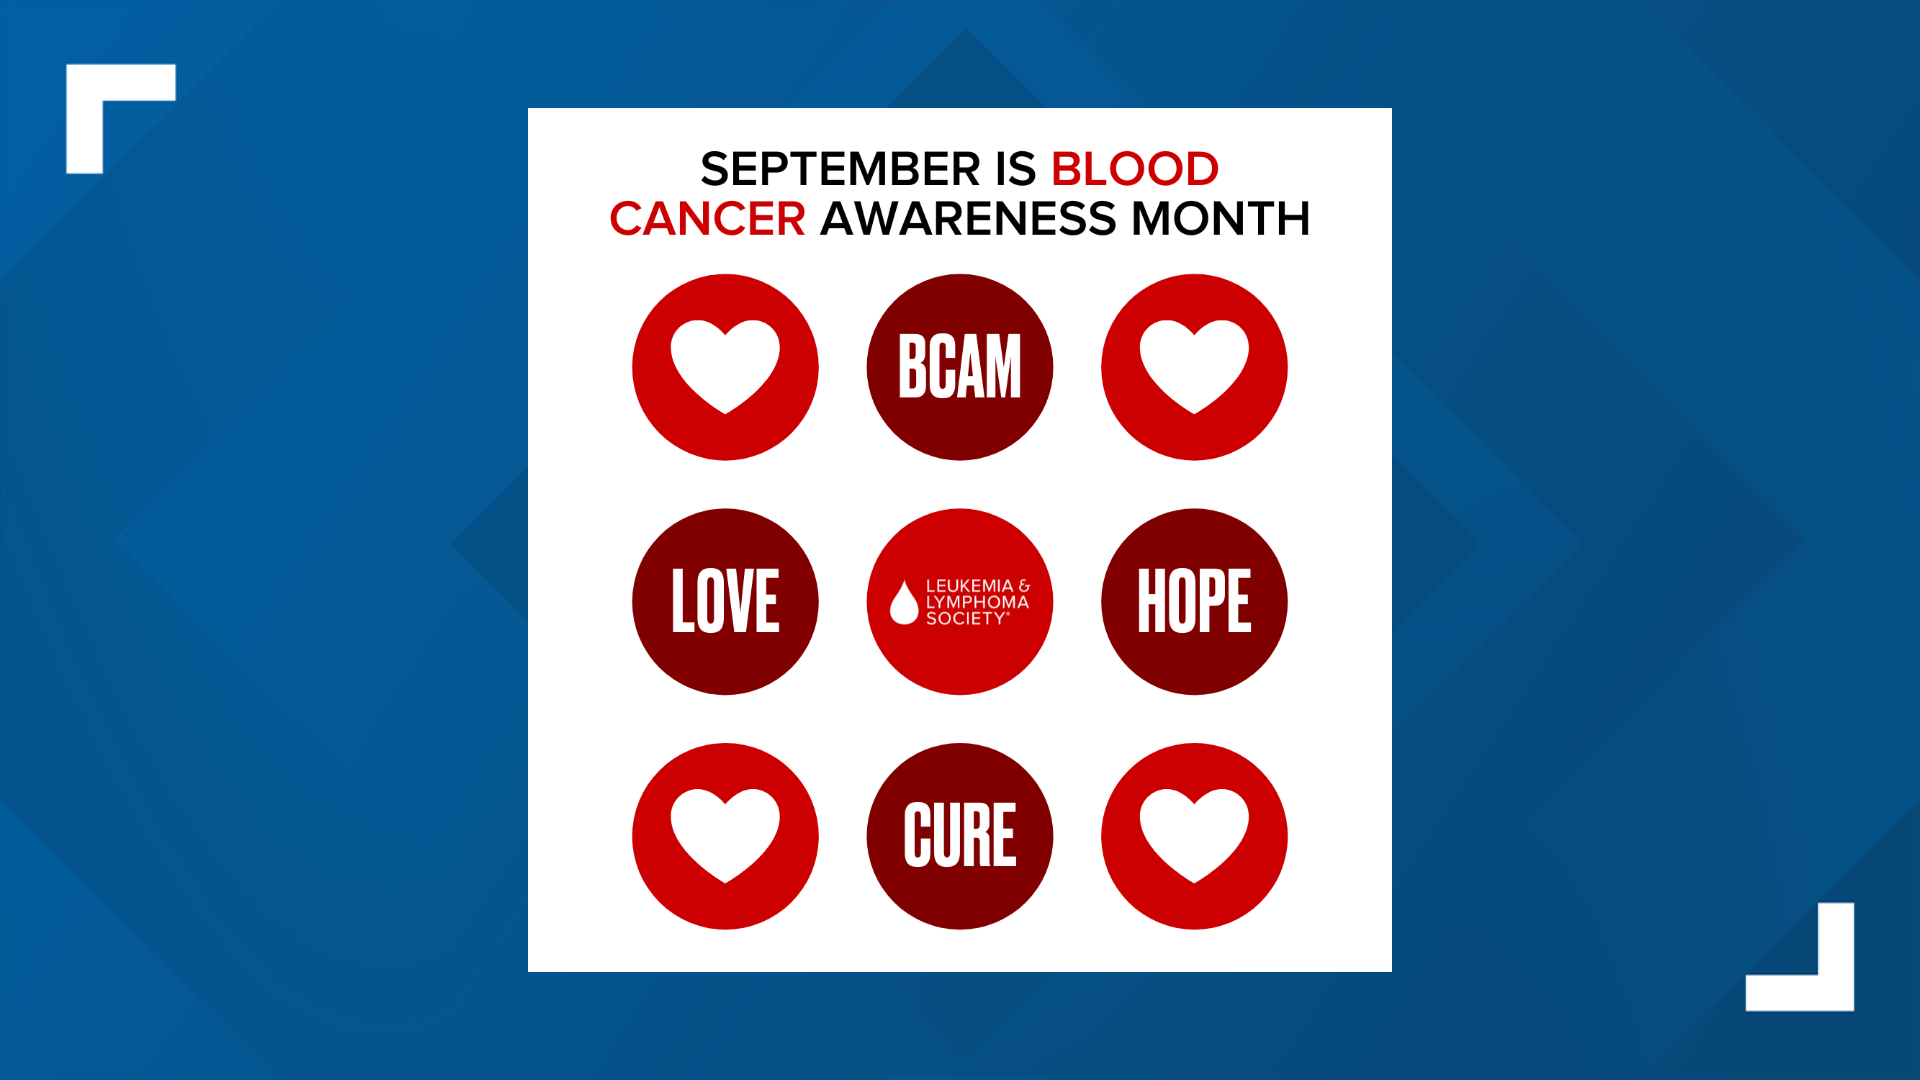 Chumi Khurana, Chair of the Board of Trustees for the Eastern Pa.-Delaware region of LLS, joined FOX43 on Sept. 8 to discuss Blood Cancer Awareness Month.